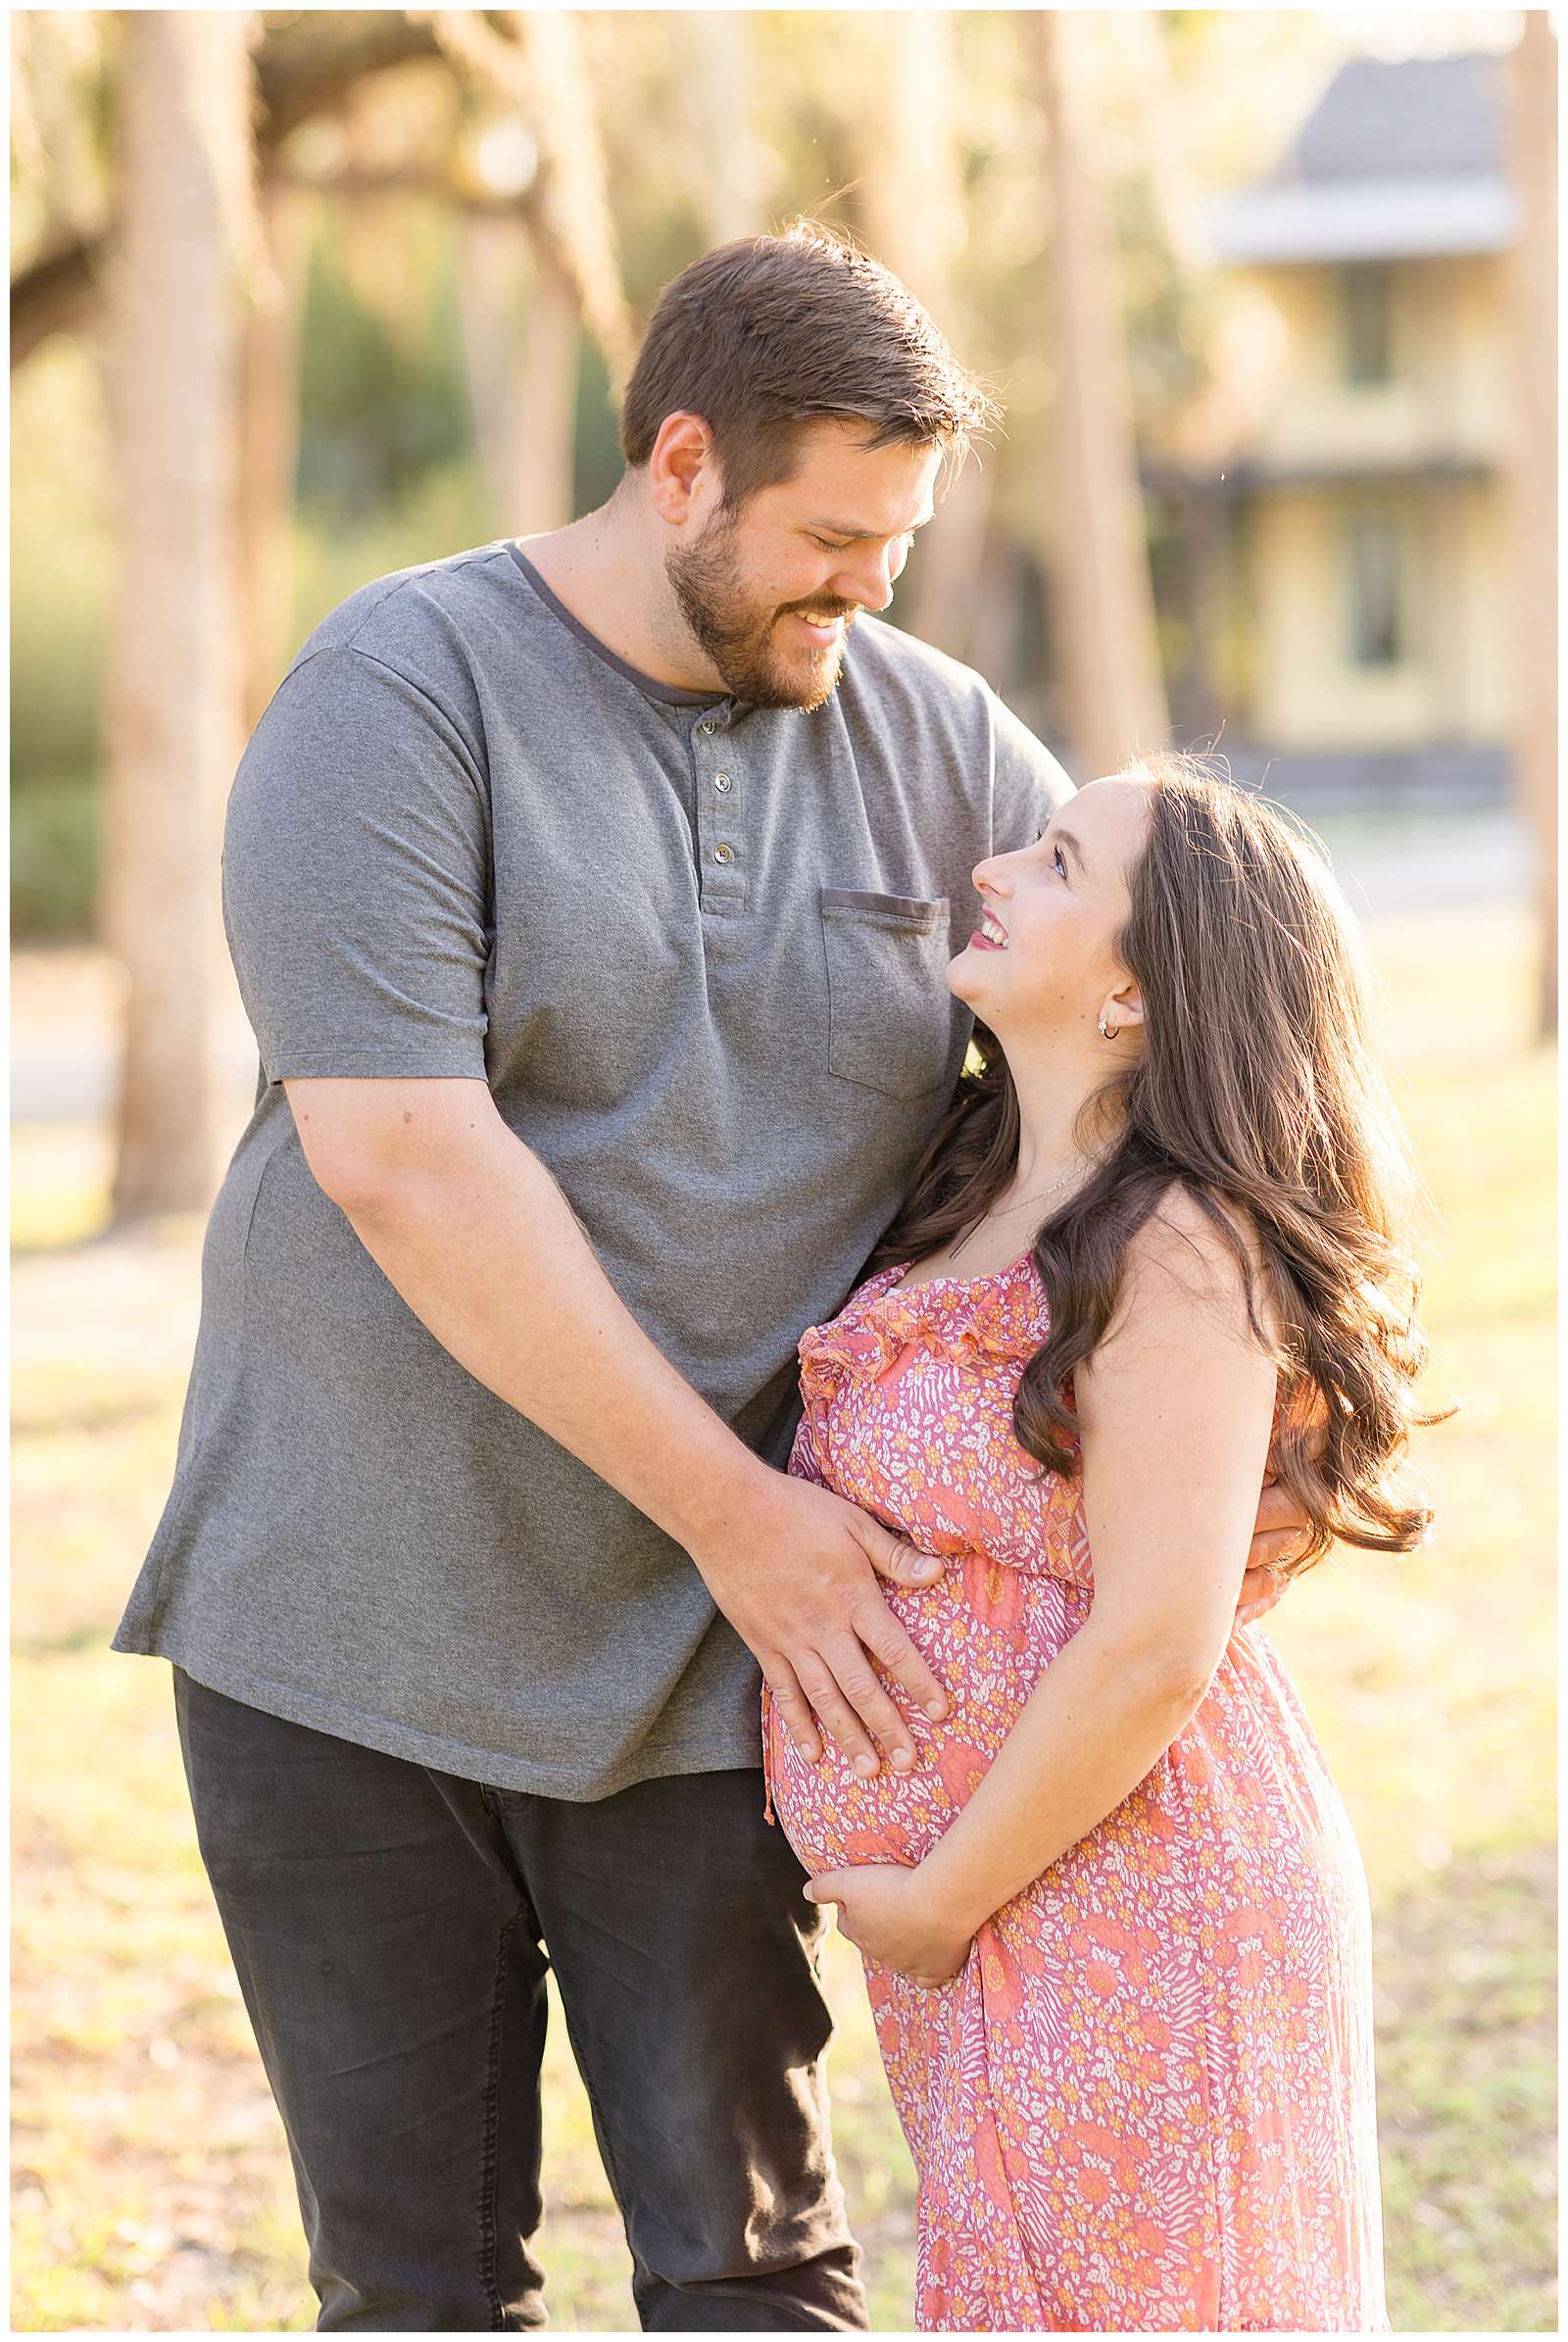 Husband with a big height difference, looks down at his wife as he holds her expecting baby belly and she looks up at him as they smile at each other! Click to see more on the blog today!
-rebeccaricephoto.com